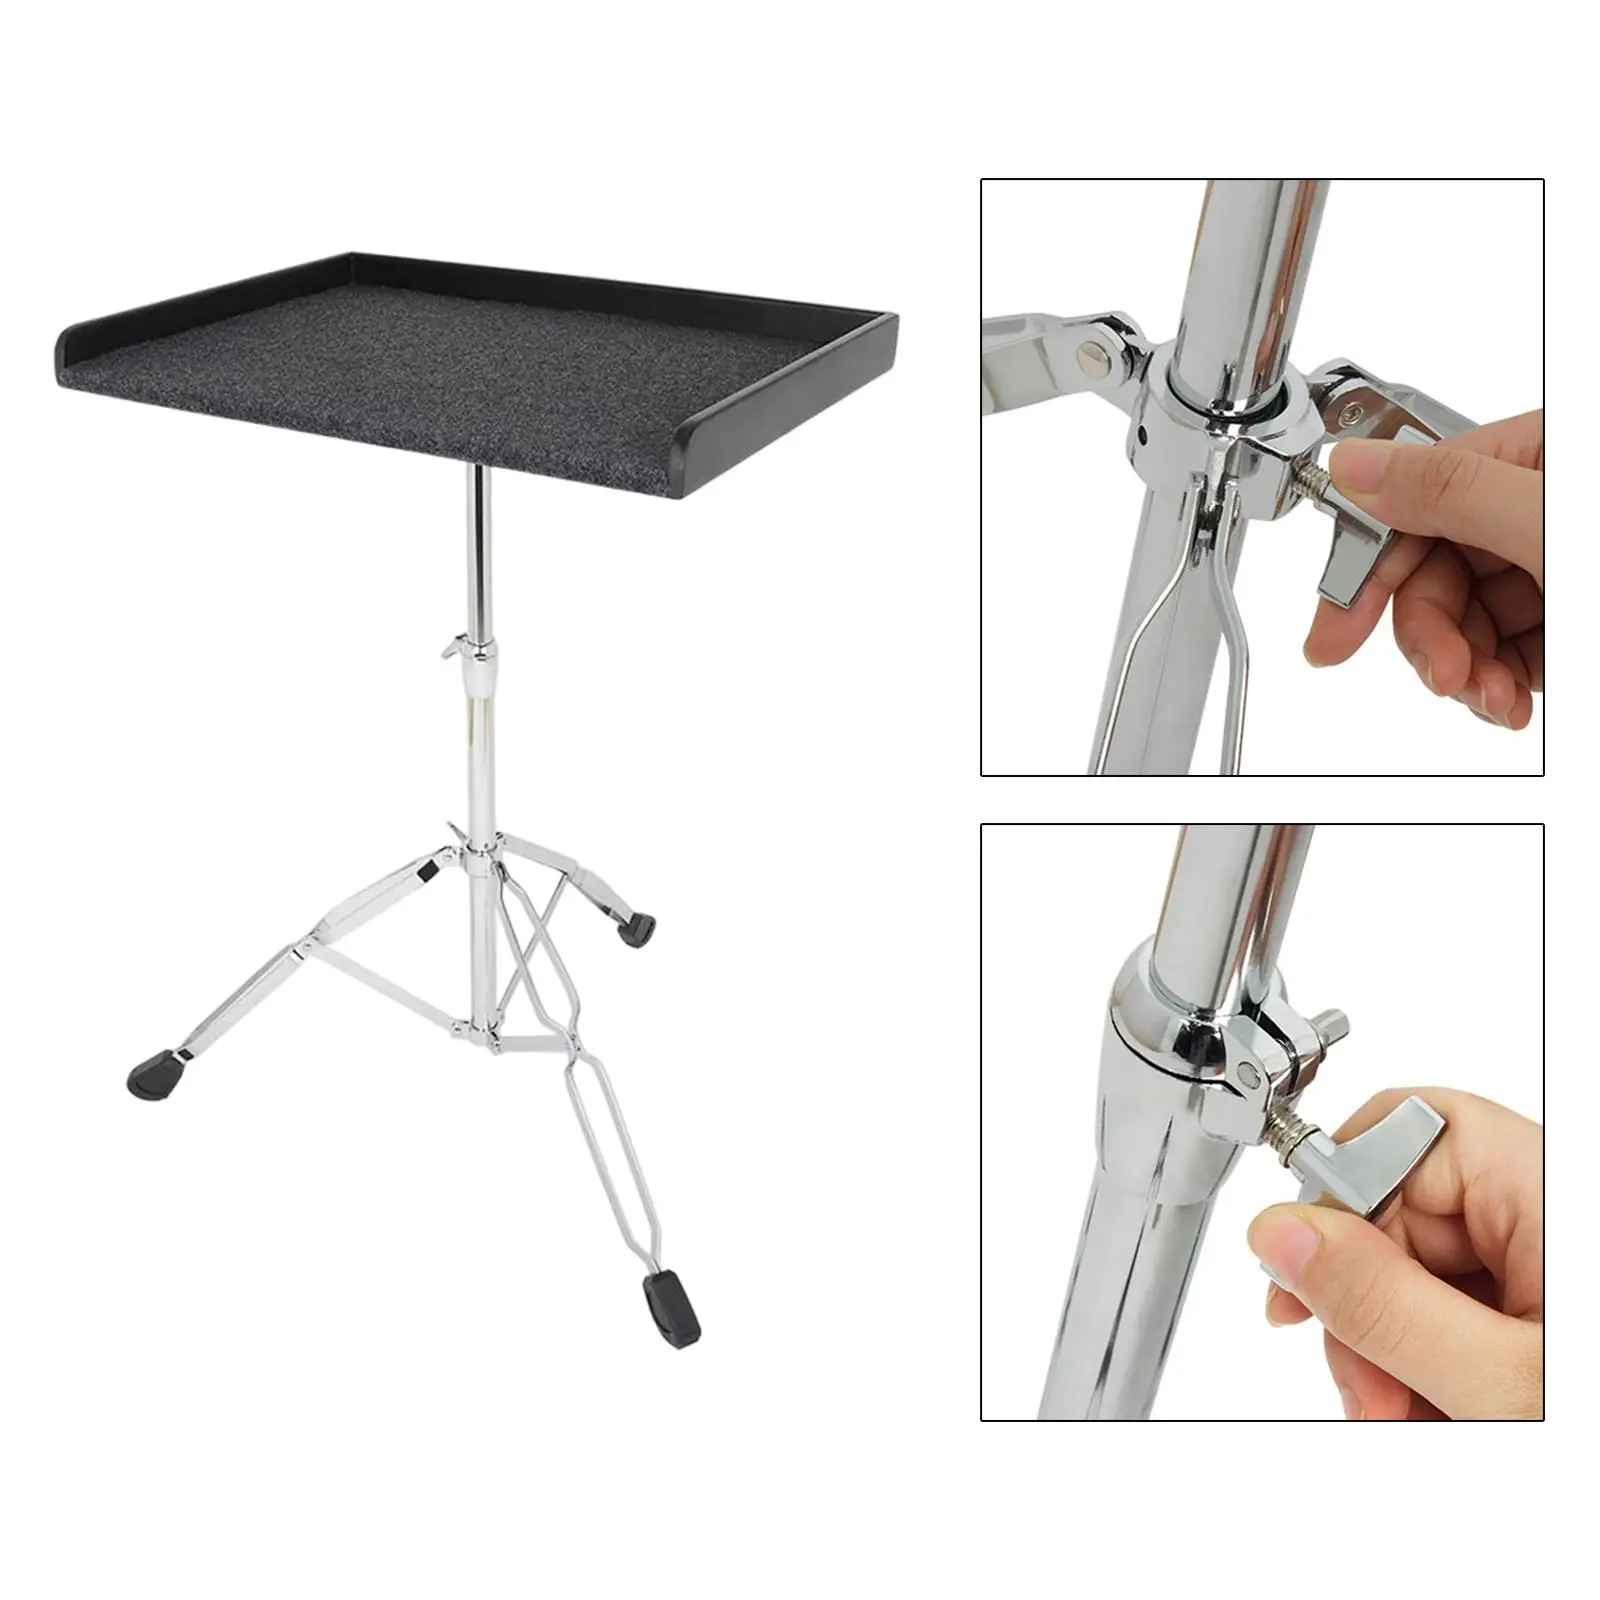 Professional Percussion Table Portable Tripod Stand Adjustable Drum Stool Mount Holder for Workstation Music Gig